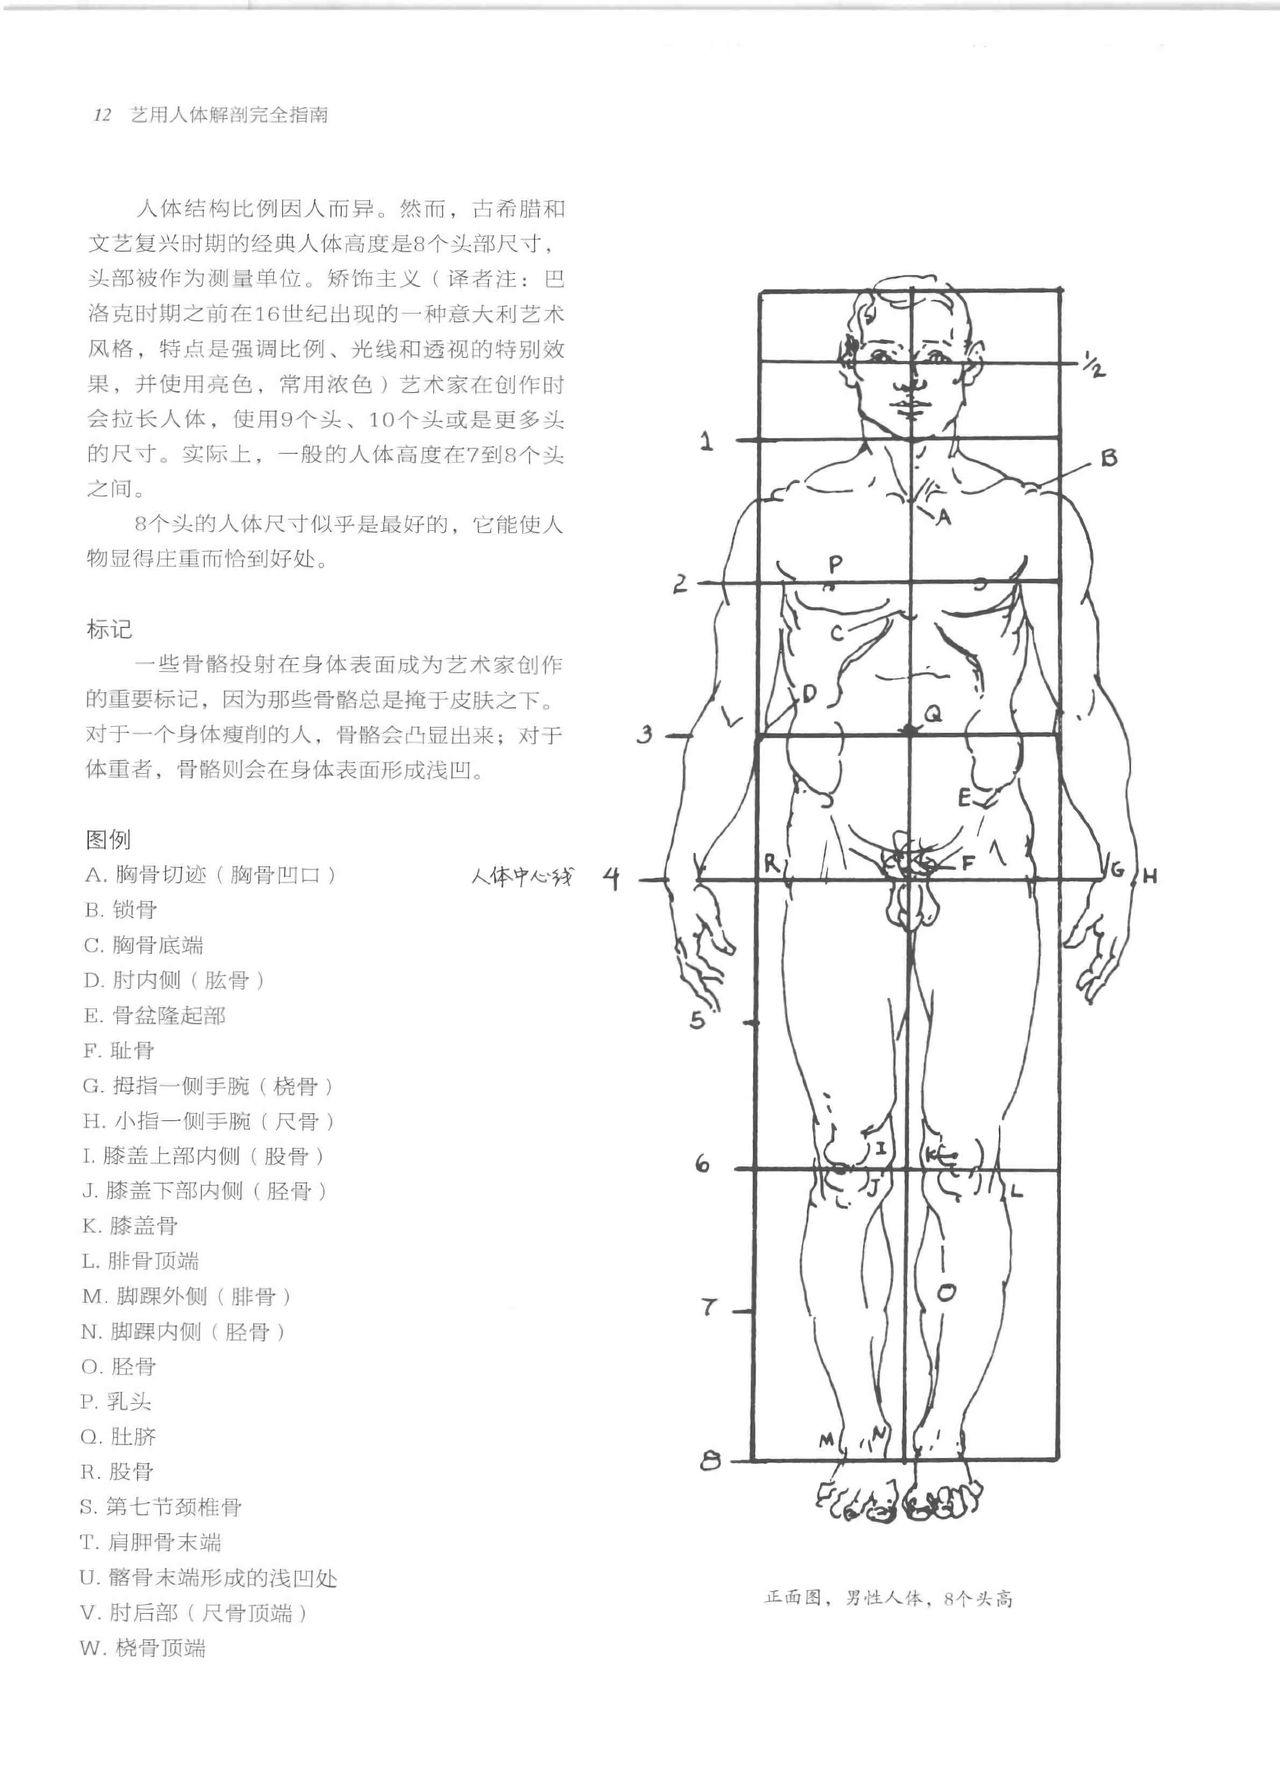 Anatomy-A Complete Guide for Artists - Joseph Sheppard [Chinese] 12